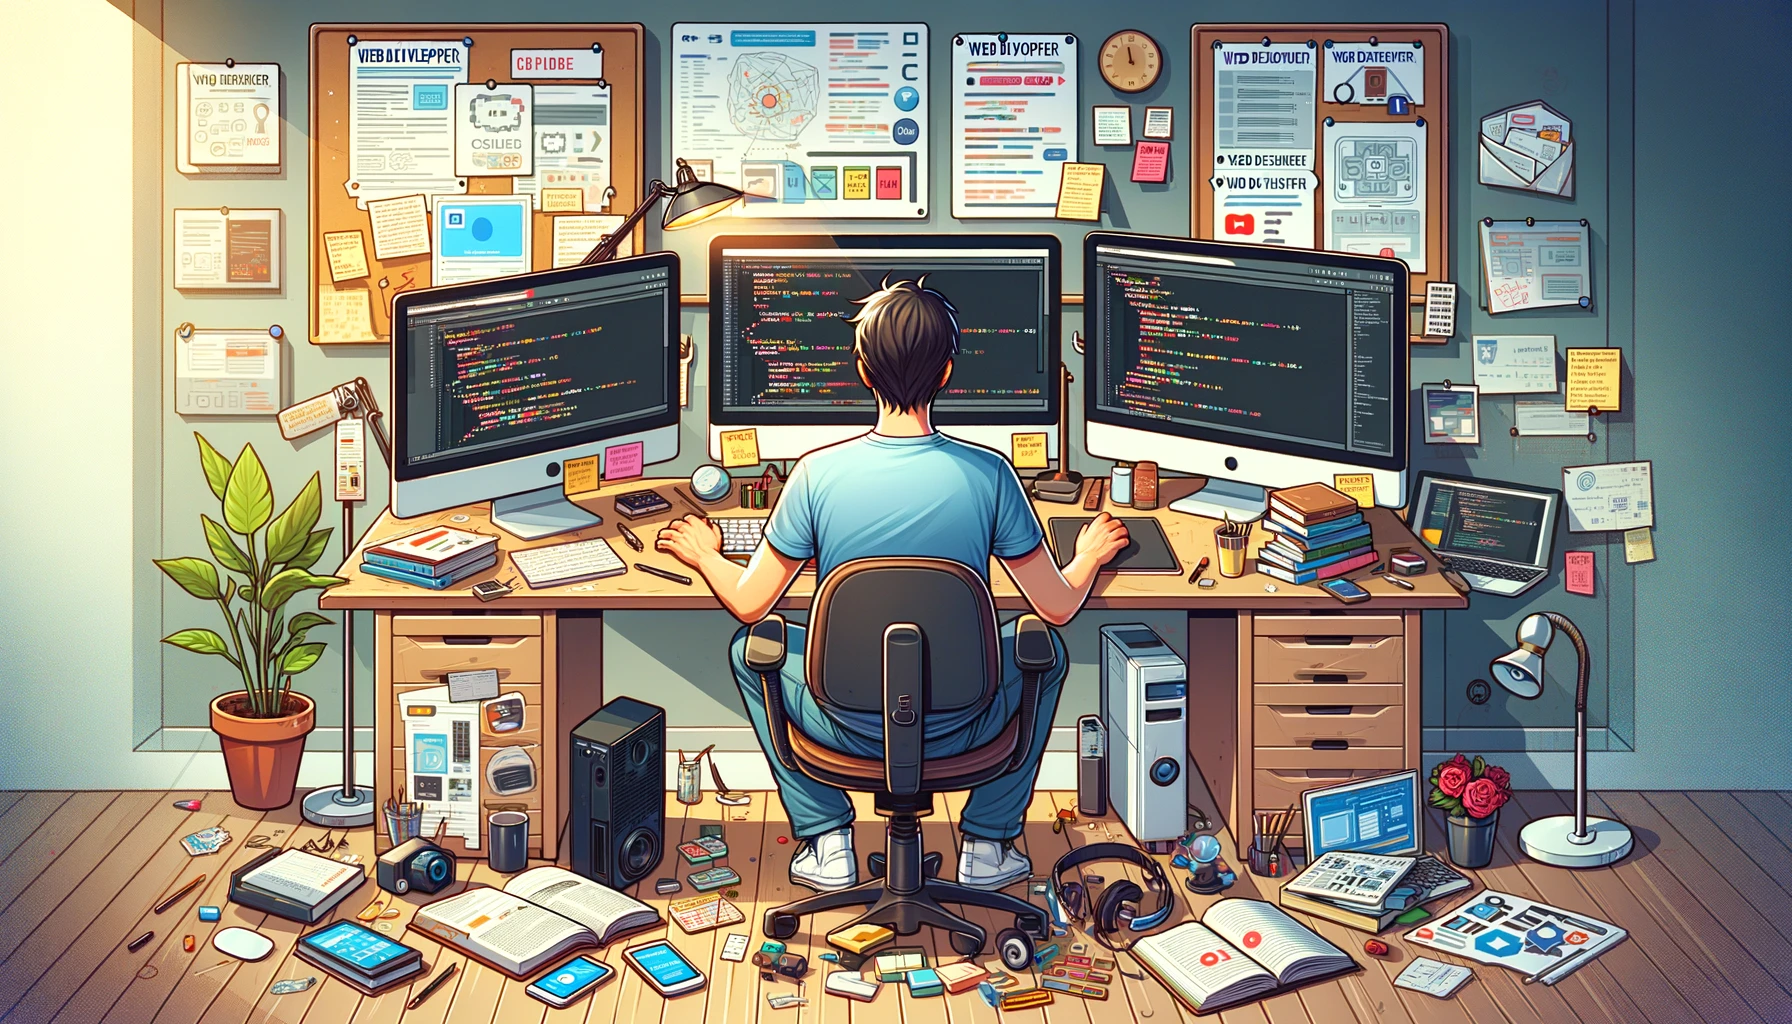 What Do You Need to Be a Web Developer?